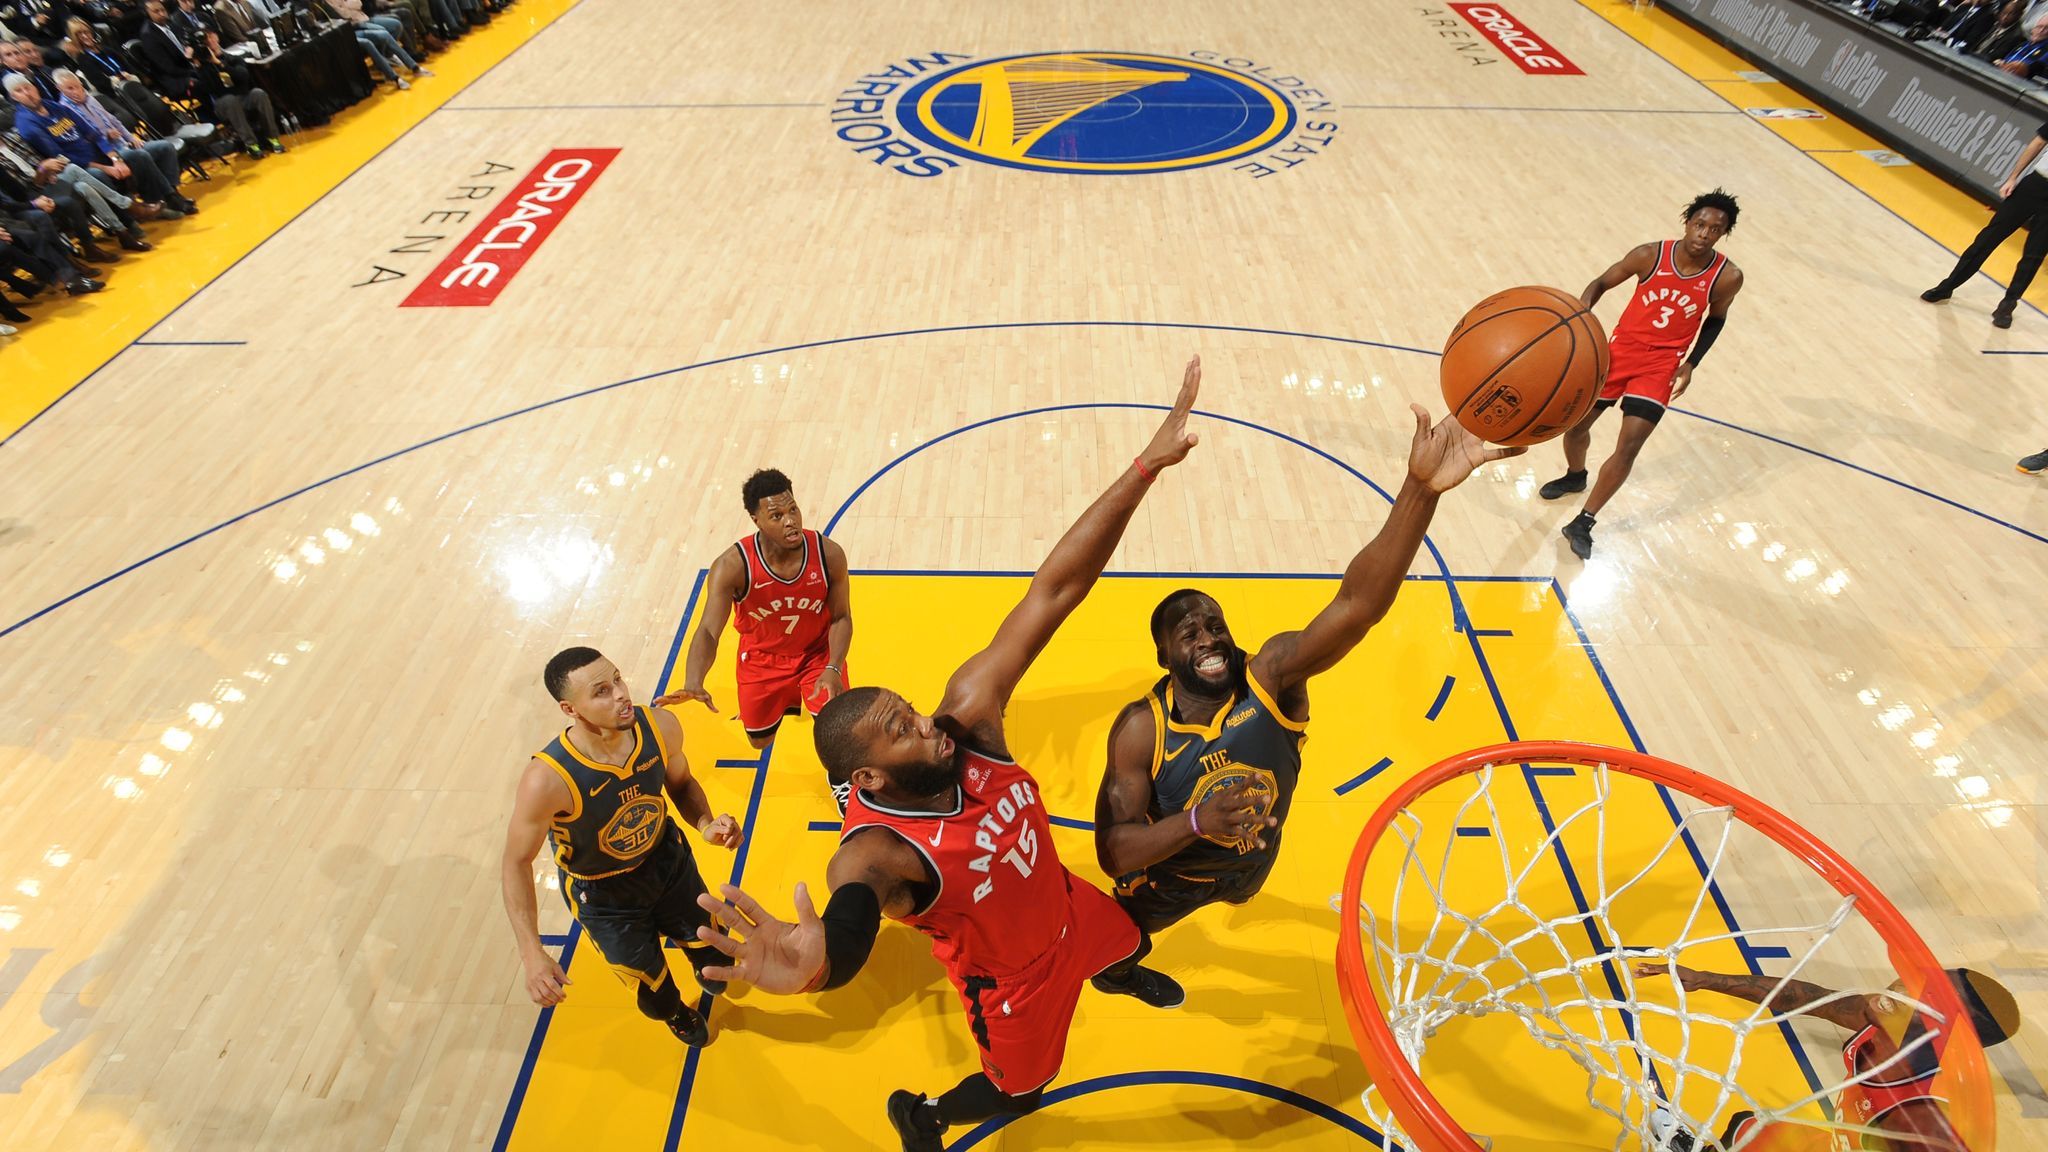 Rockets vs. Warriors Part 2 is here. The stakes could not be